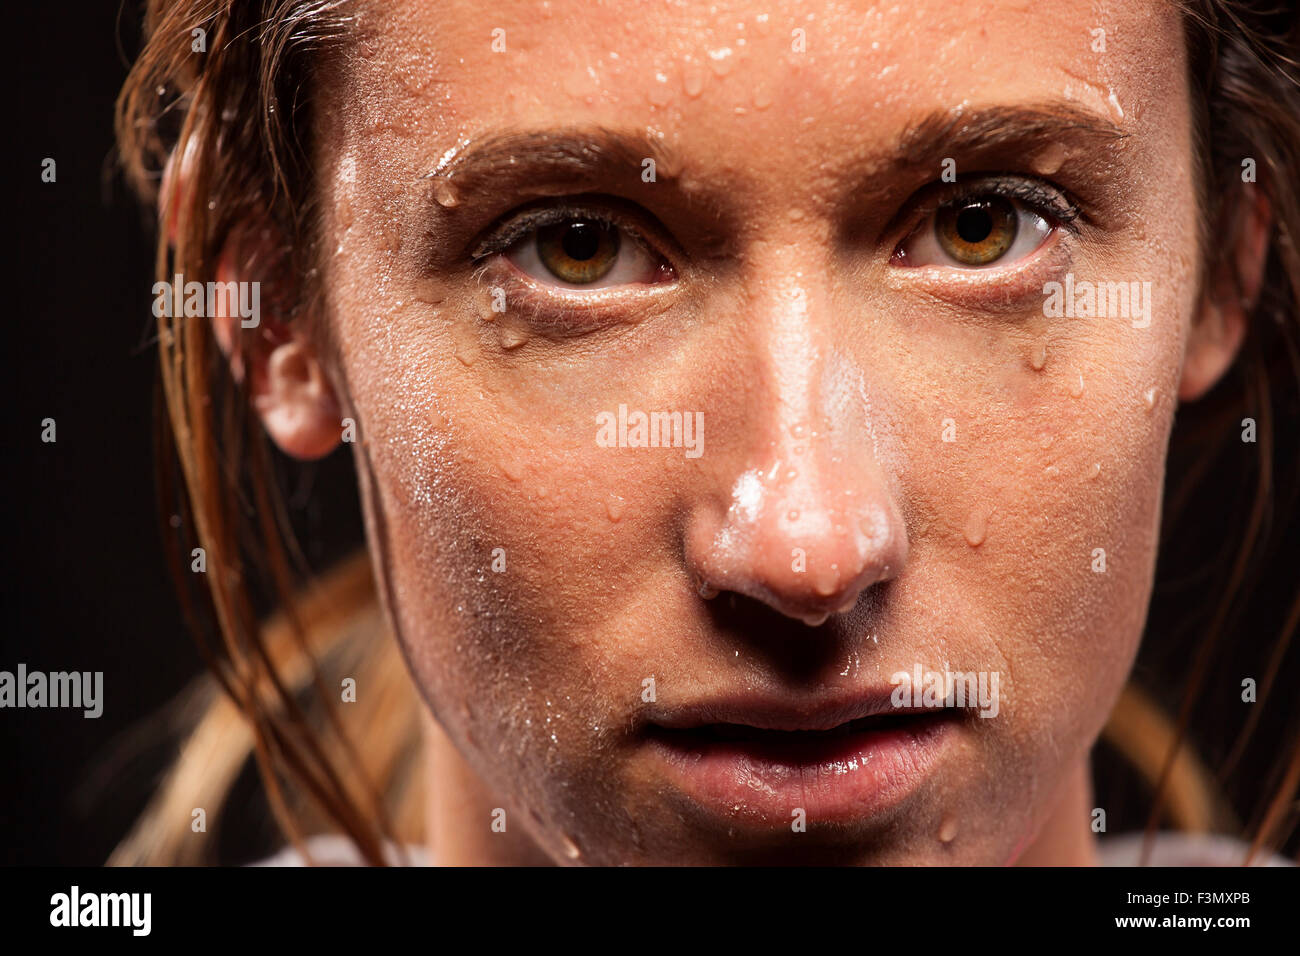 Woman with sweat on face Stock Photo